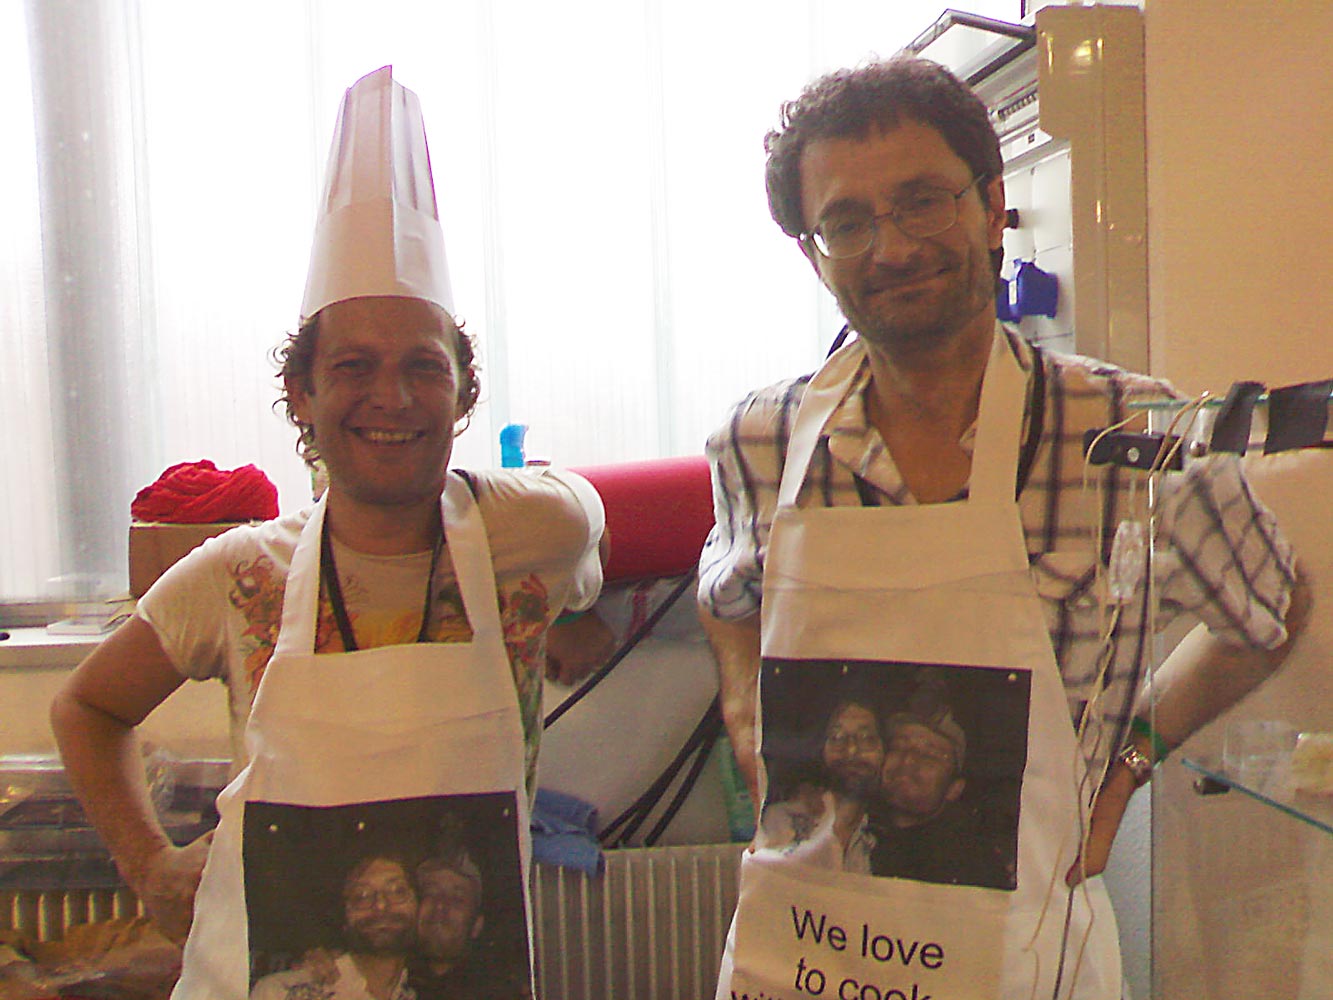 /include/Virtuals/AN2-SM2021/AN2images/US/Alfredo-Petrov-and-Frank-de-Wit-cooking---2011.jpg